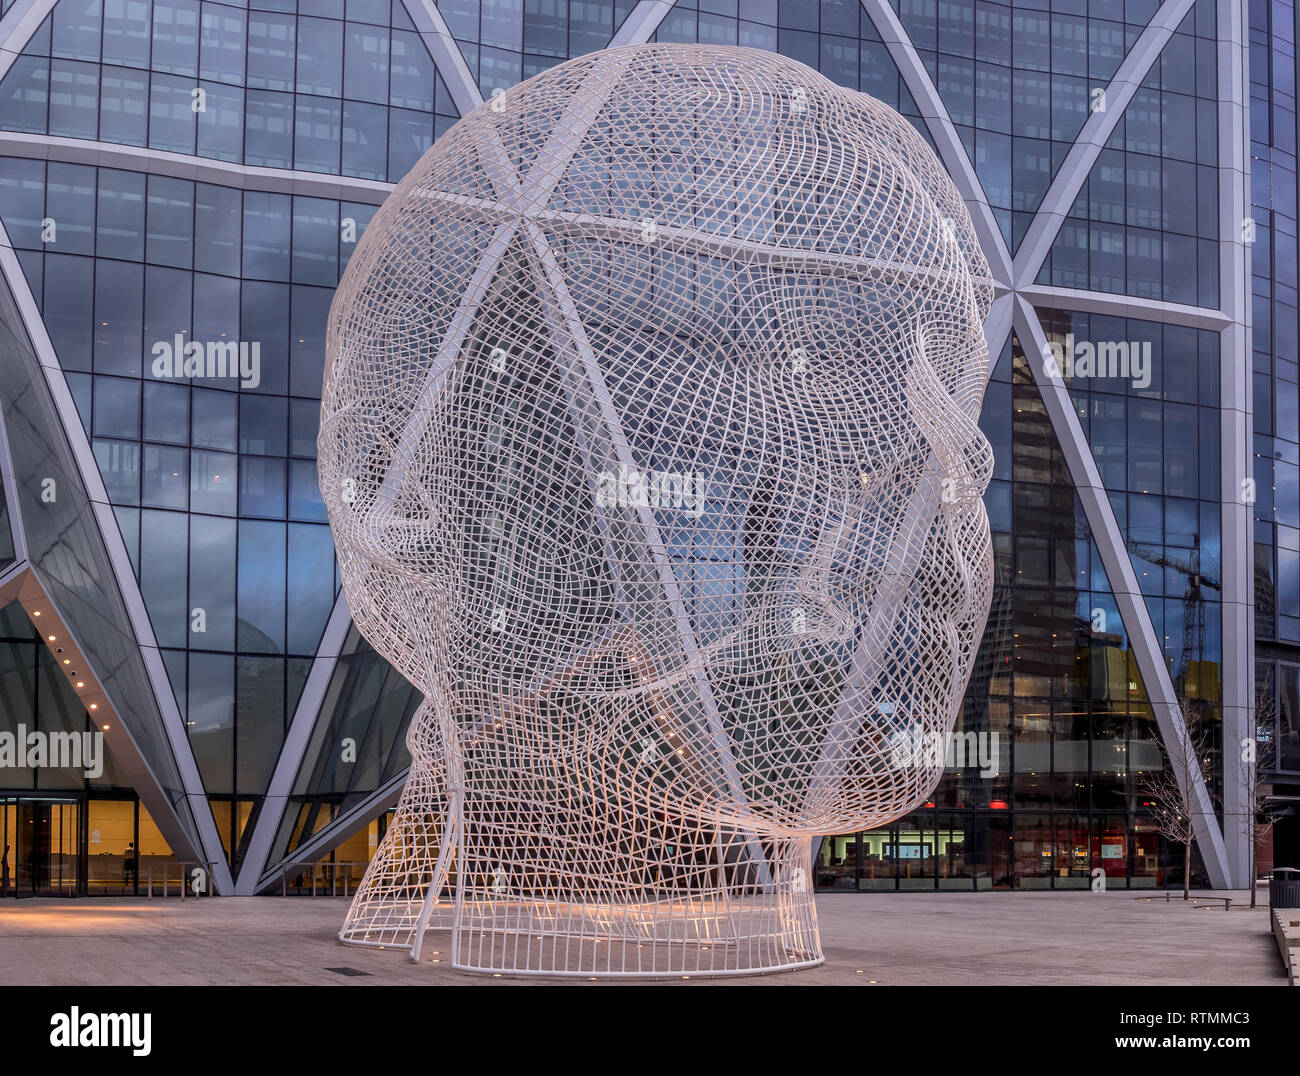 Wonderland sculpture by Jaume Plensa in the front of the Bow Tower on November 6, 2016 in Calgary, Alberta, Canada. Jaume Plensa is a Catalan Spanish Stock Photo